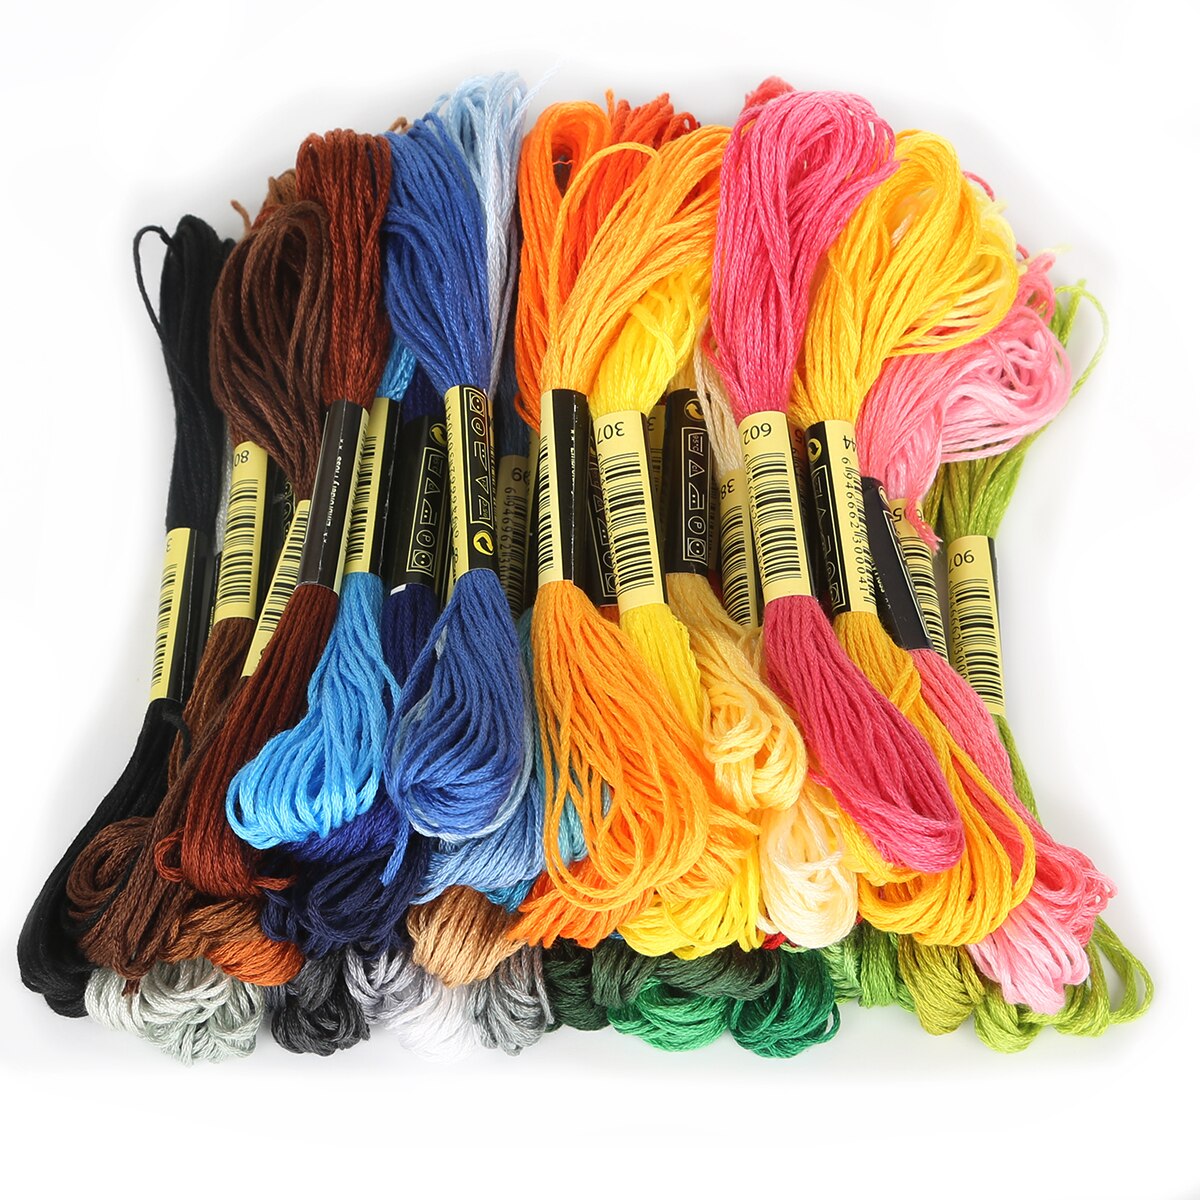 8 pcs/lot Various Colors DMC embroidery floss Cross Stitch Cotton Embroidery Thread Floss Sewing Skeins Craft